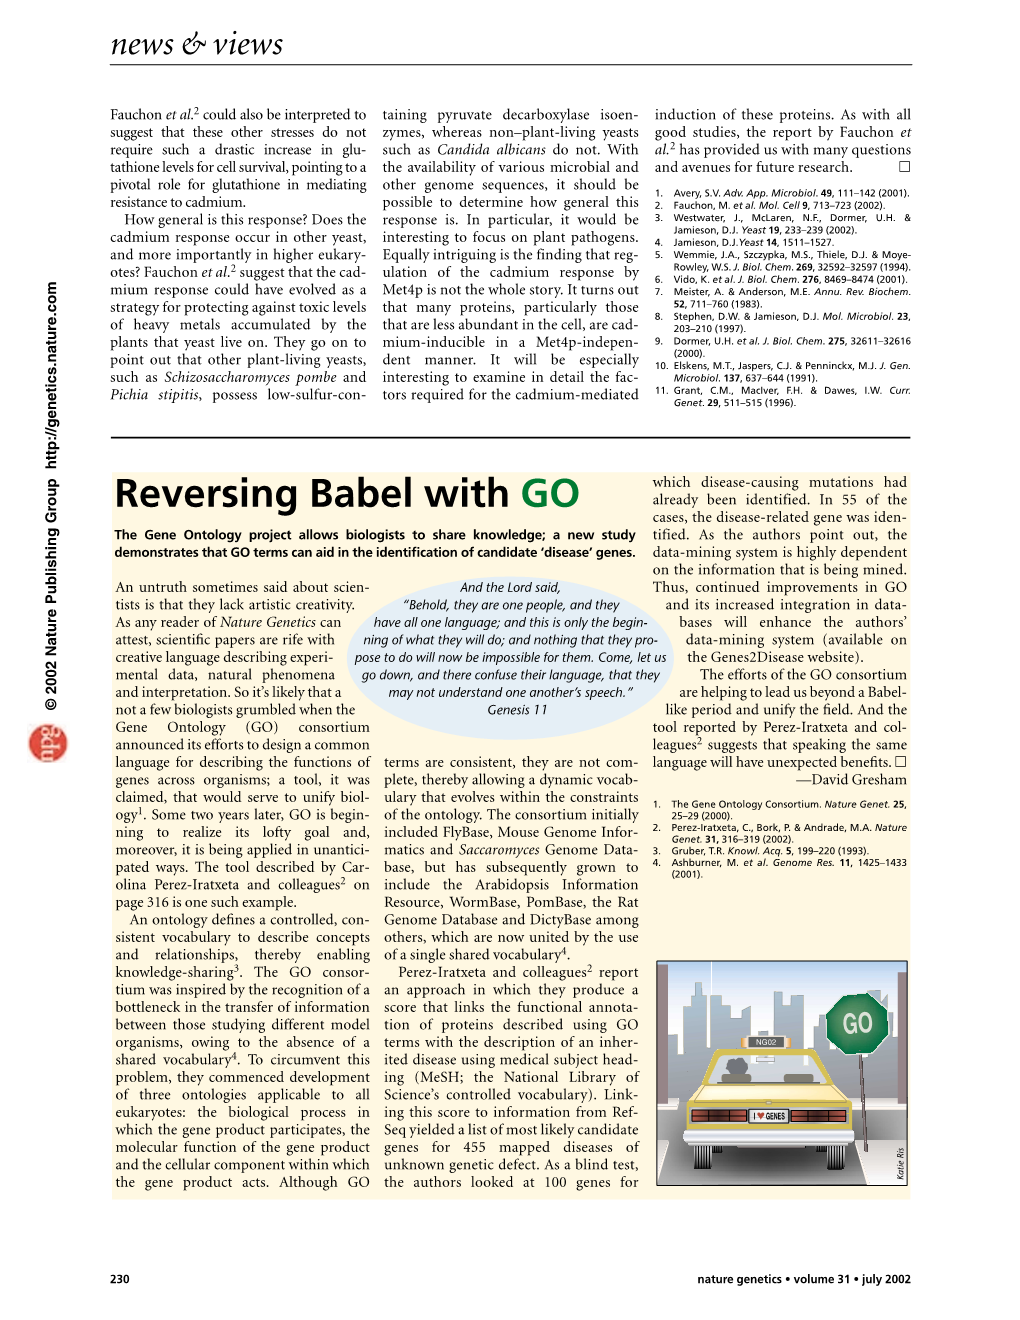 Reversing Babel with GO Already Been Identified